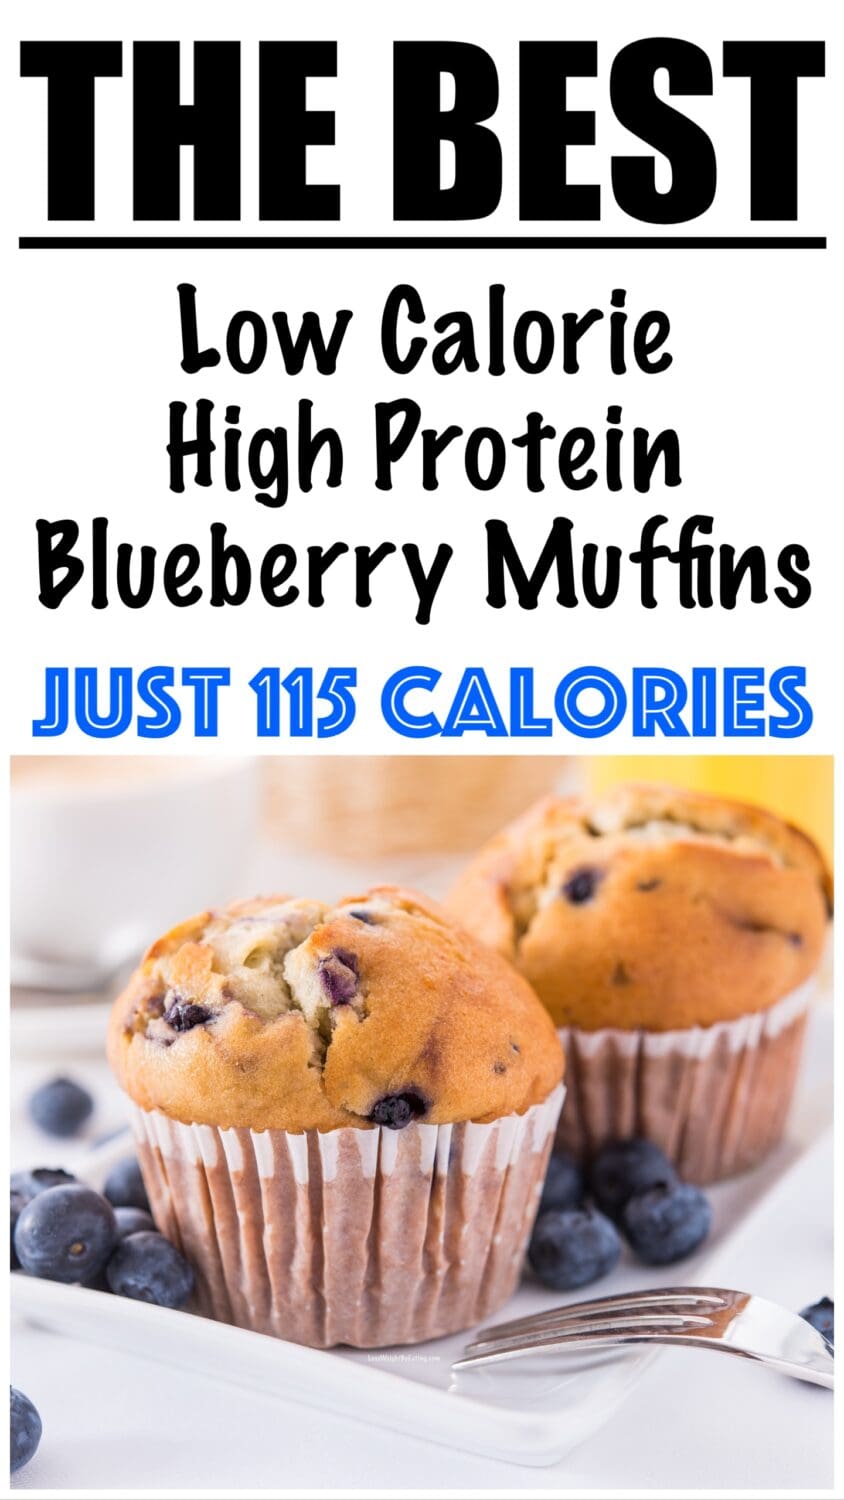 Low Calorie High Protein Blueberry Muffins Recipe